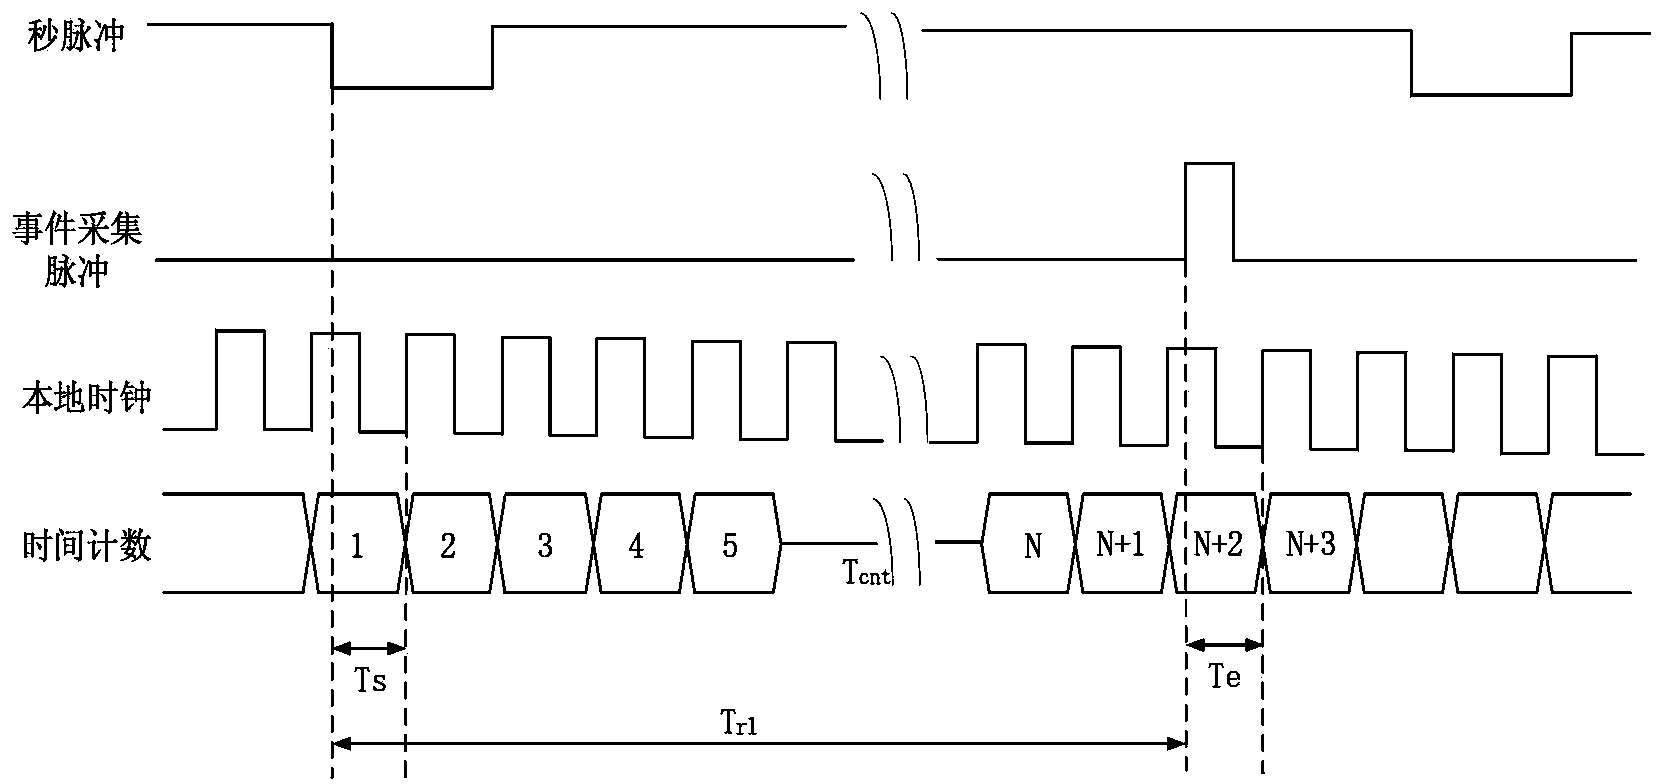 Time measuring method based on double-clock system